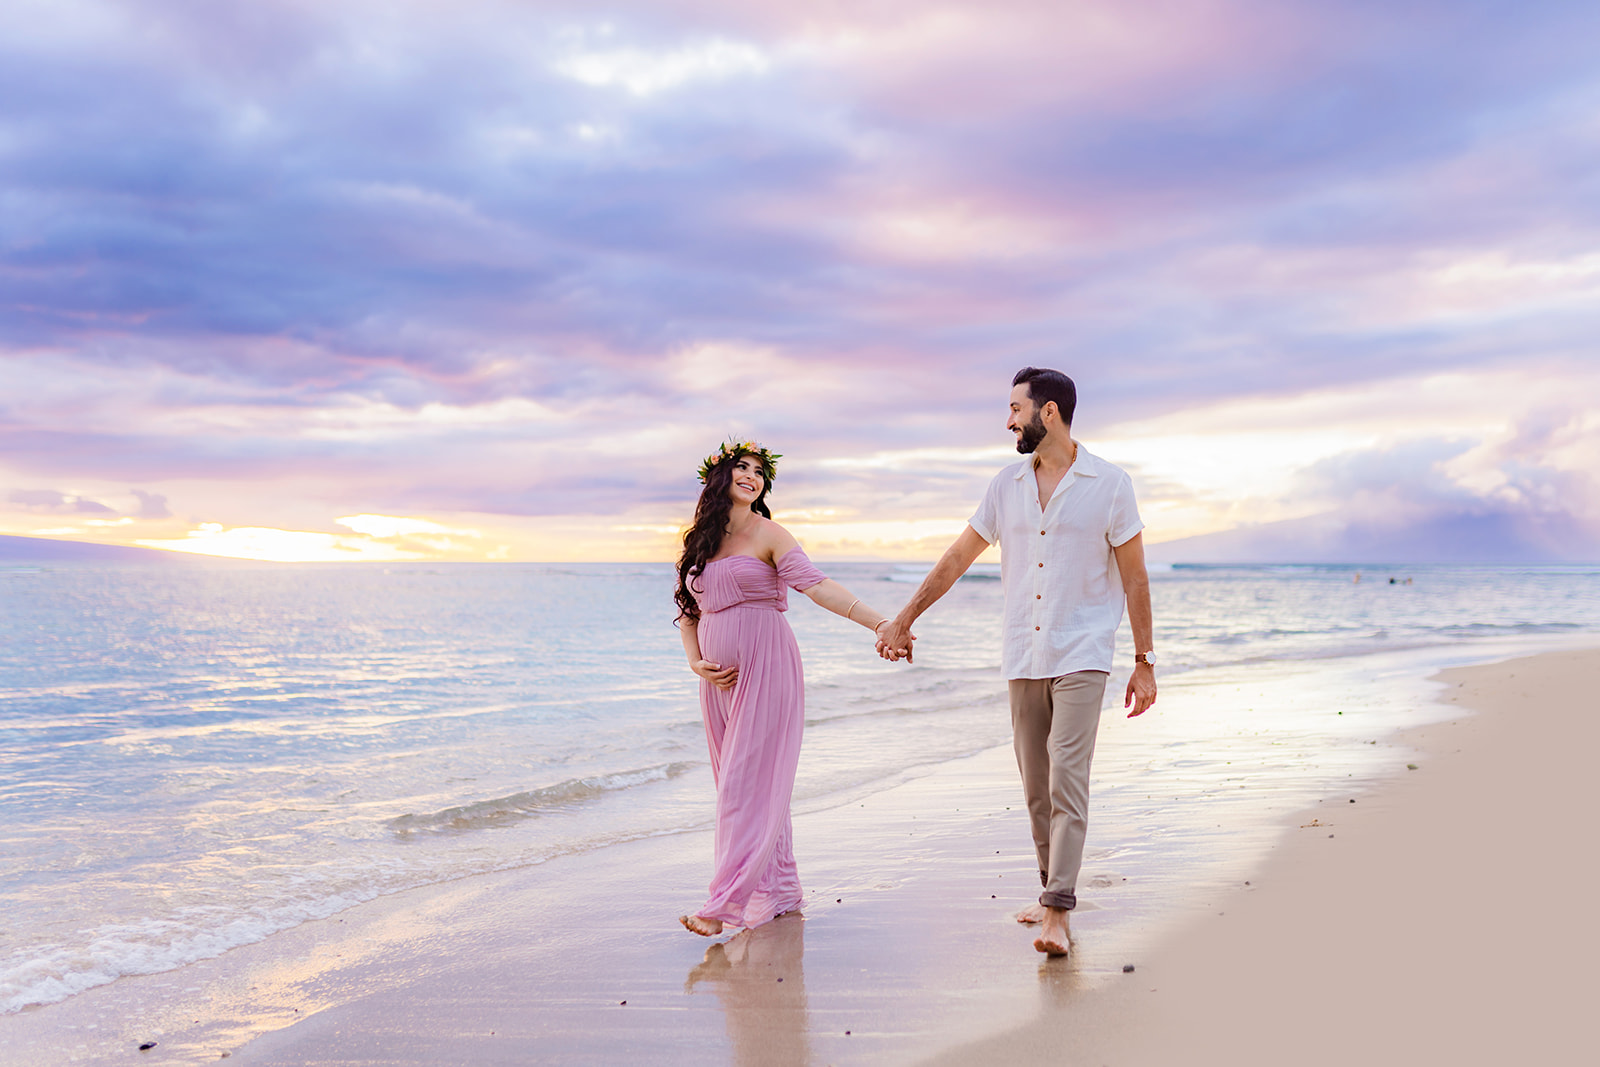 pregnant woman strolls on the beach with her significant other hand in hand smiling under a pastel sky